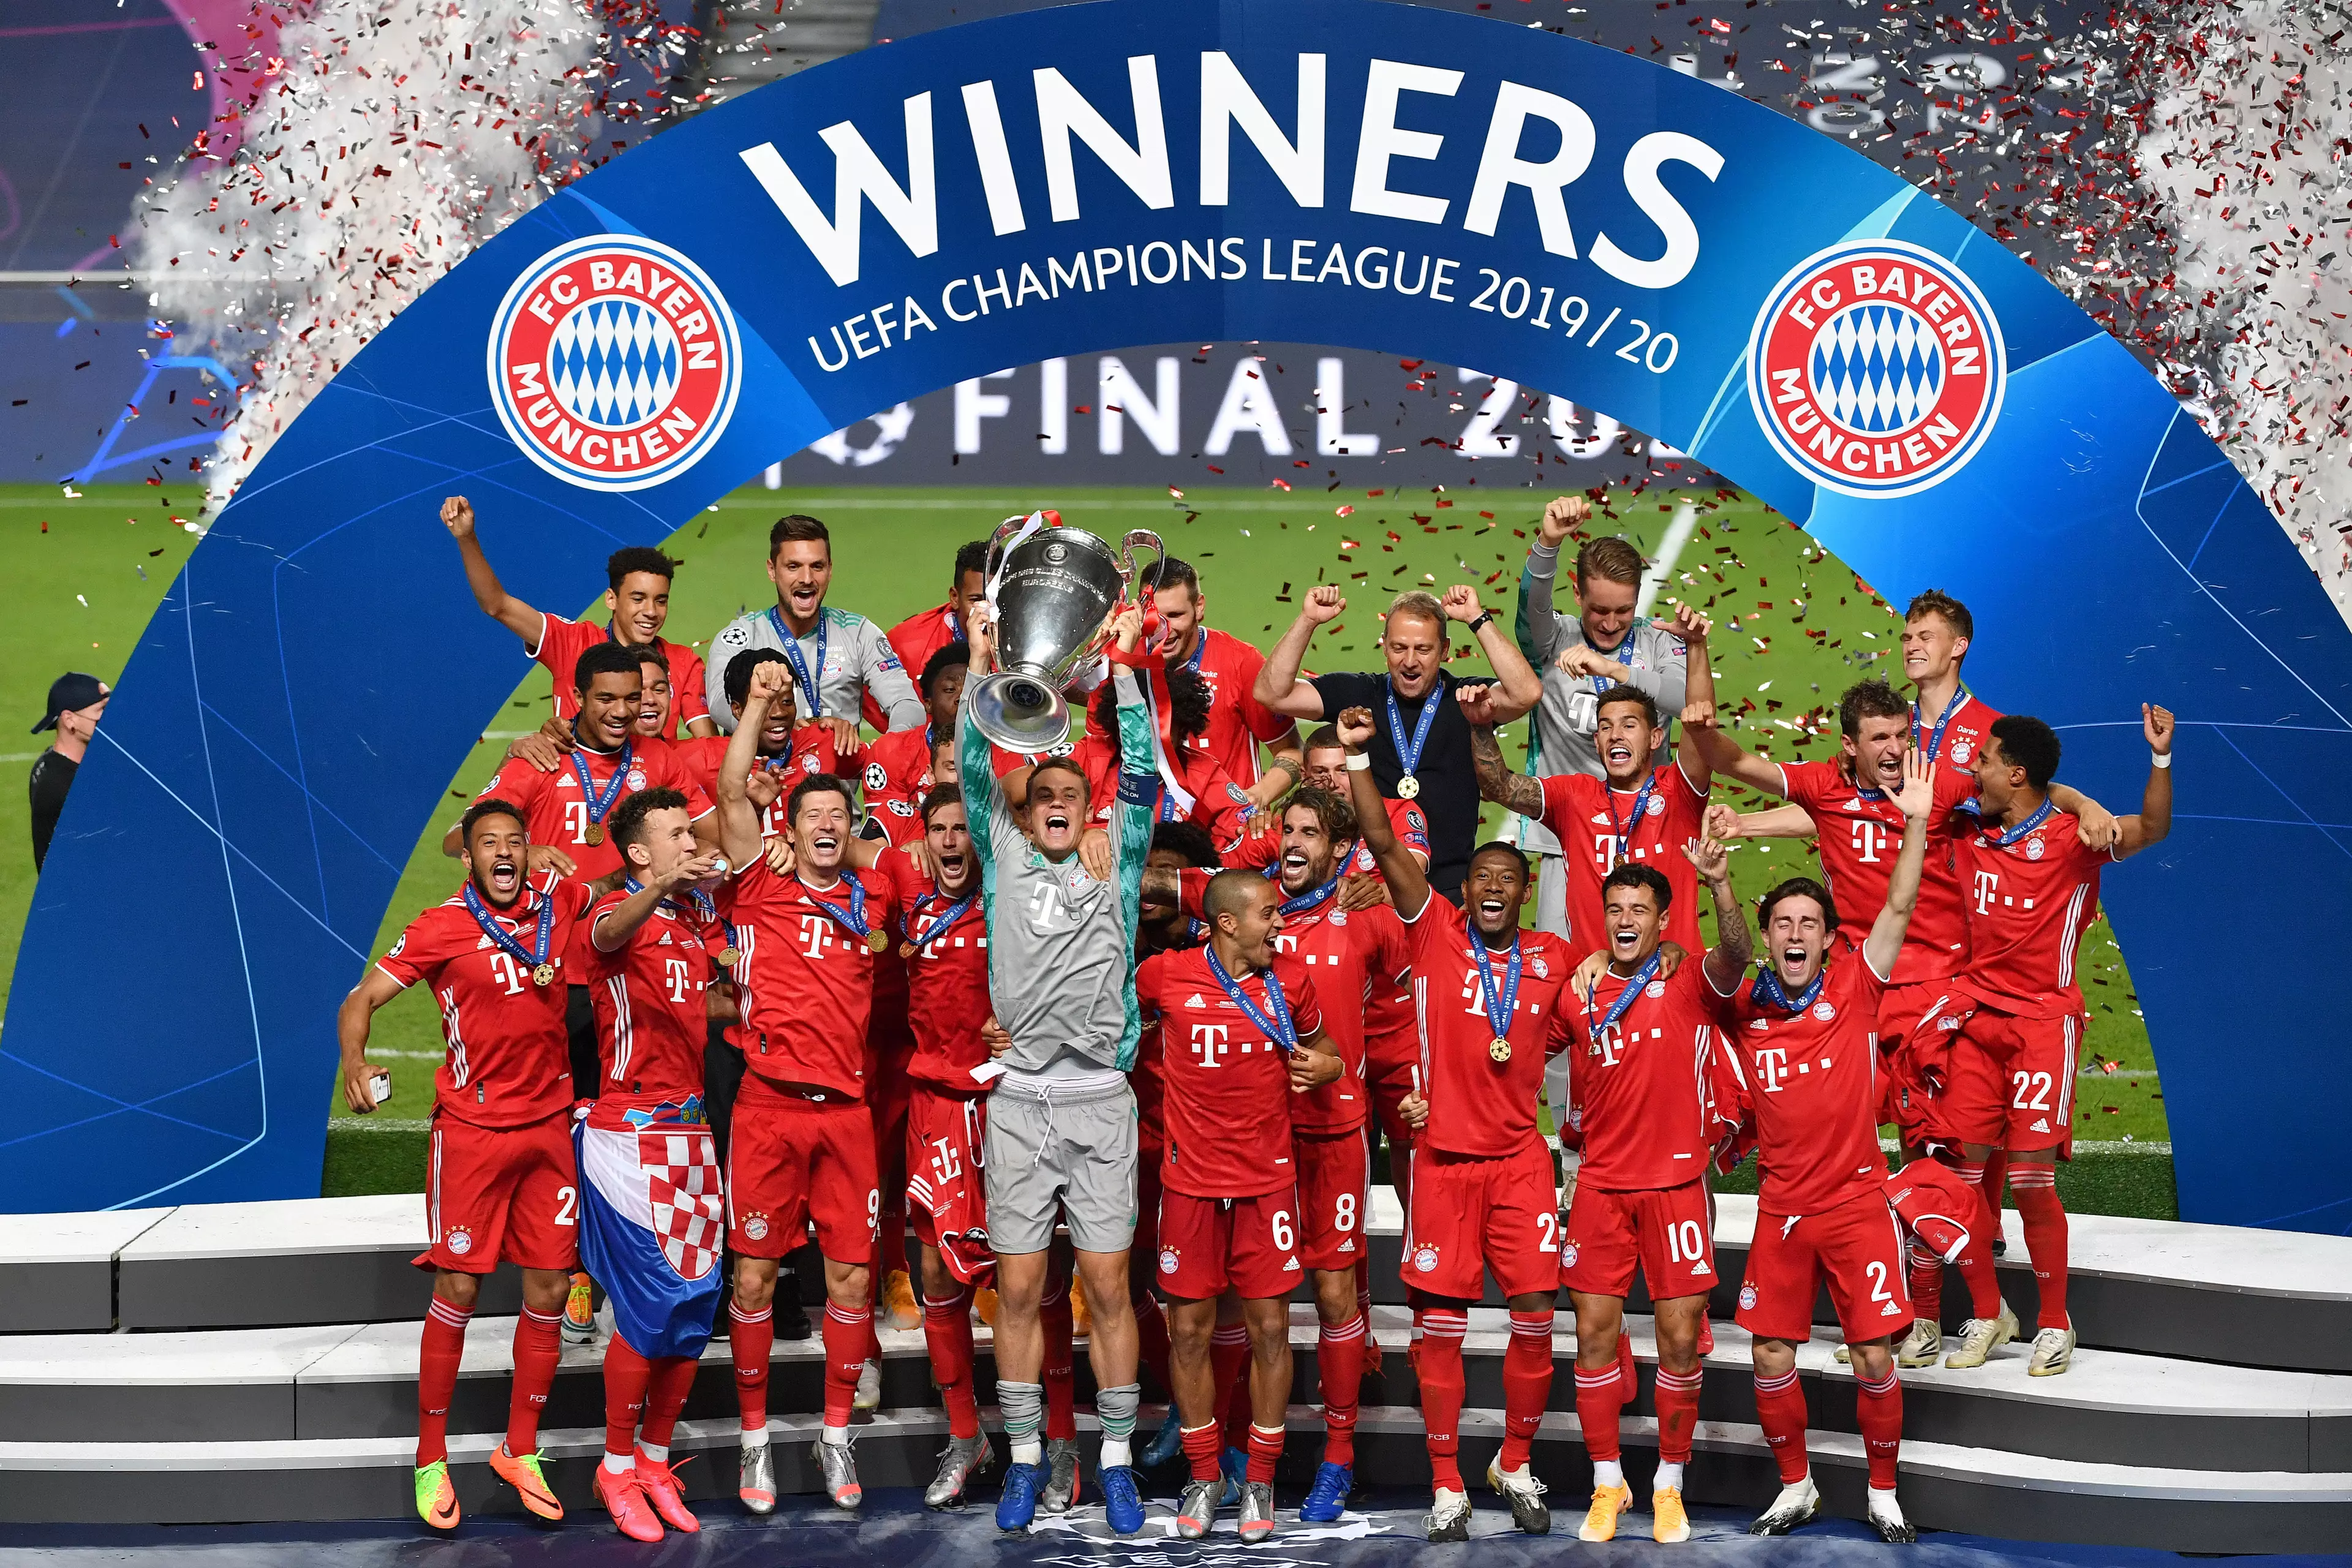 Bayern are currently Champions League holders but aren't included in the new Super League plans. Image: PA Images